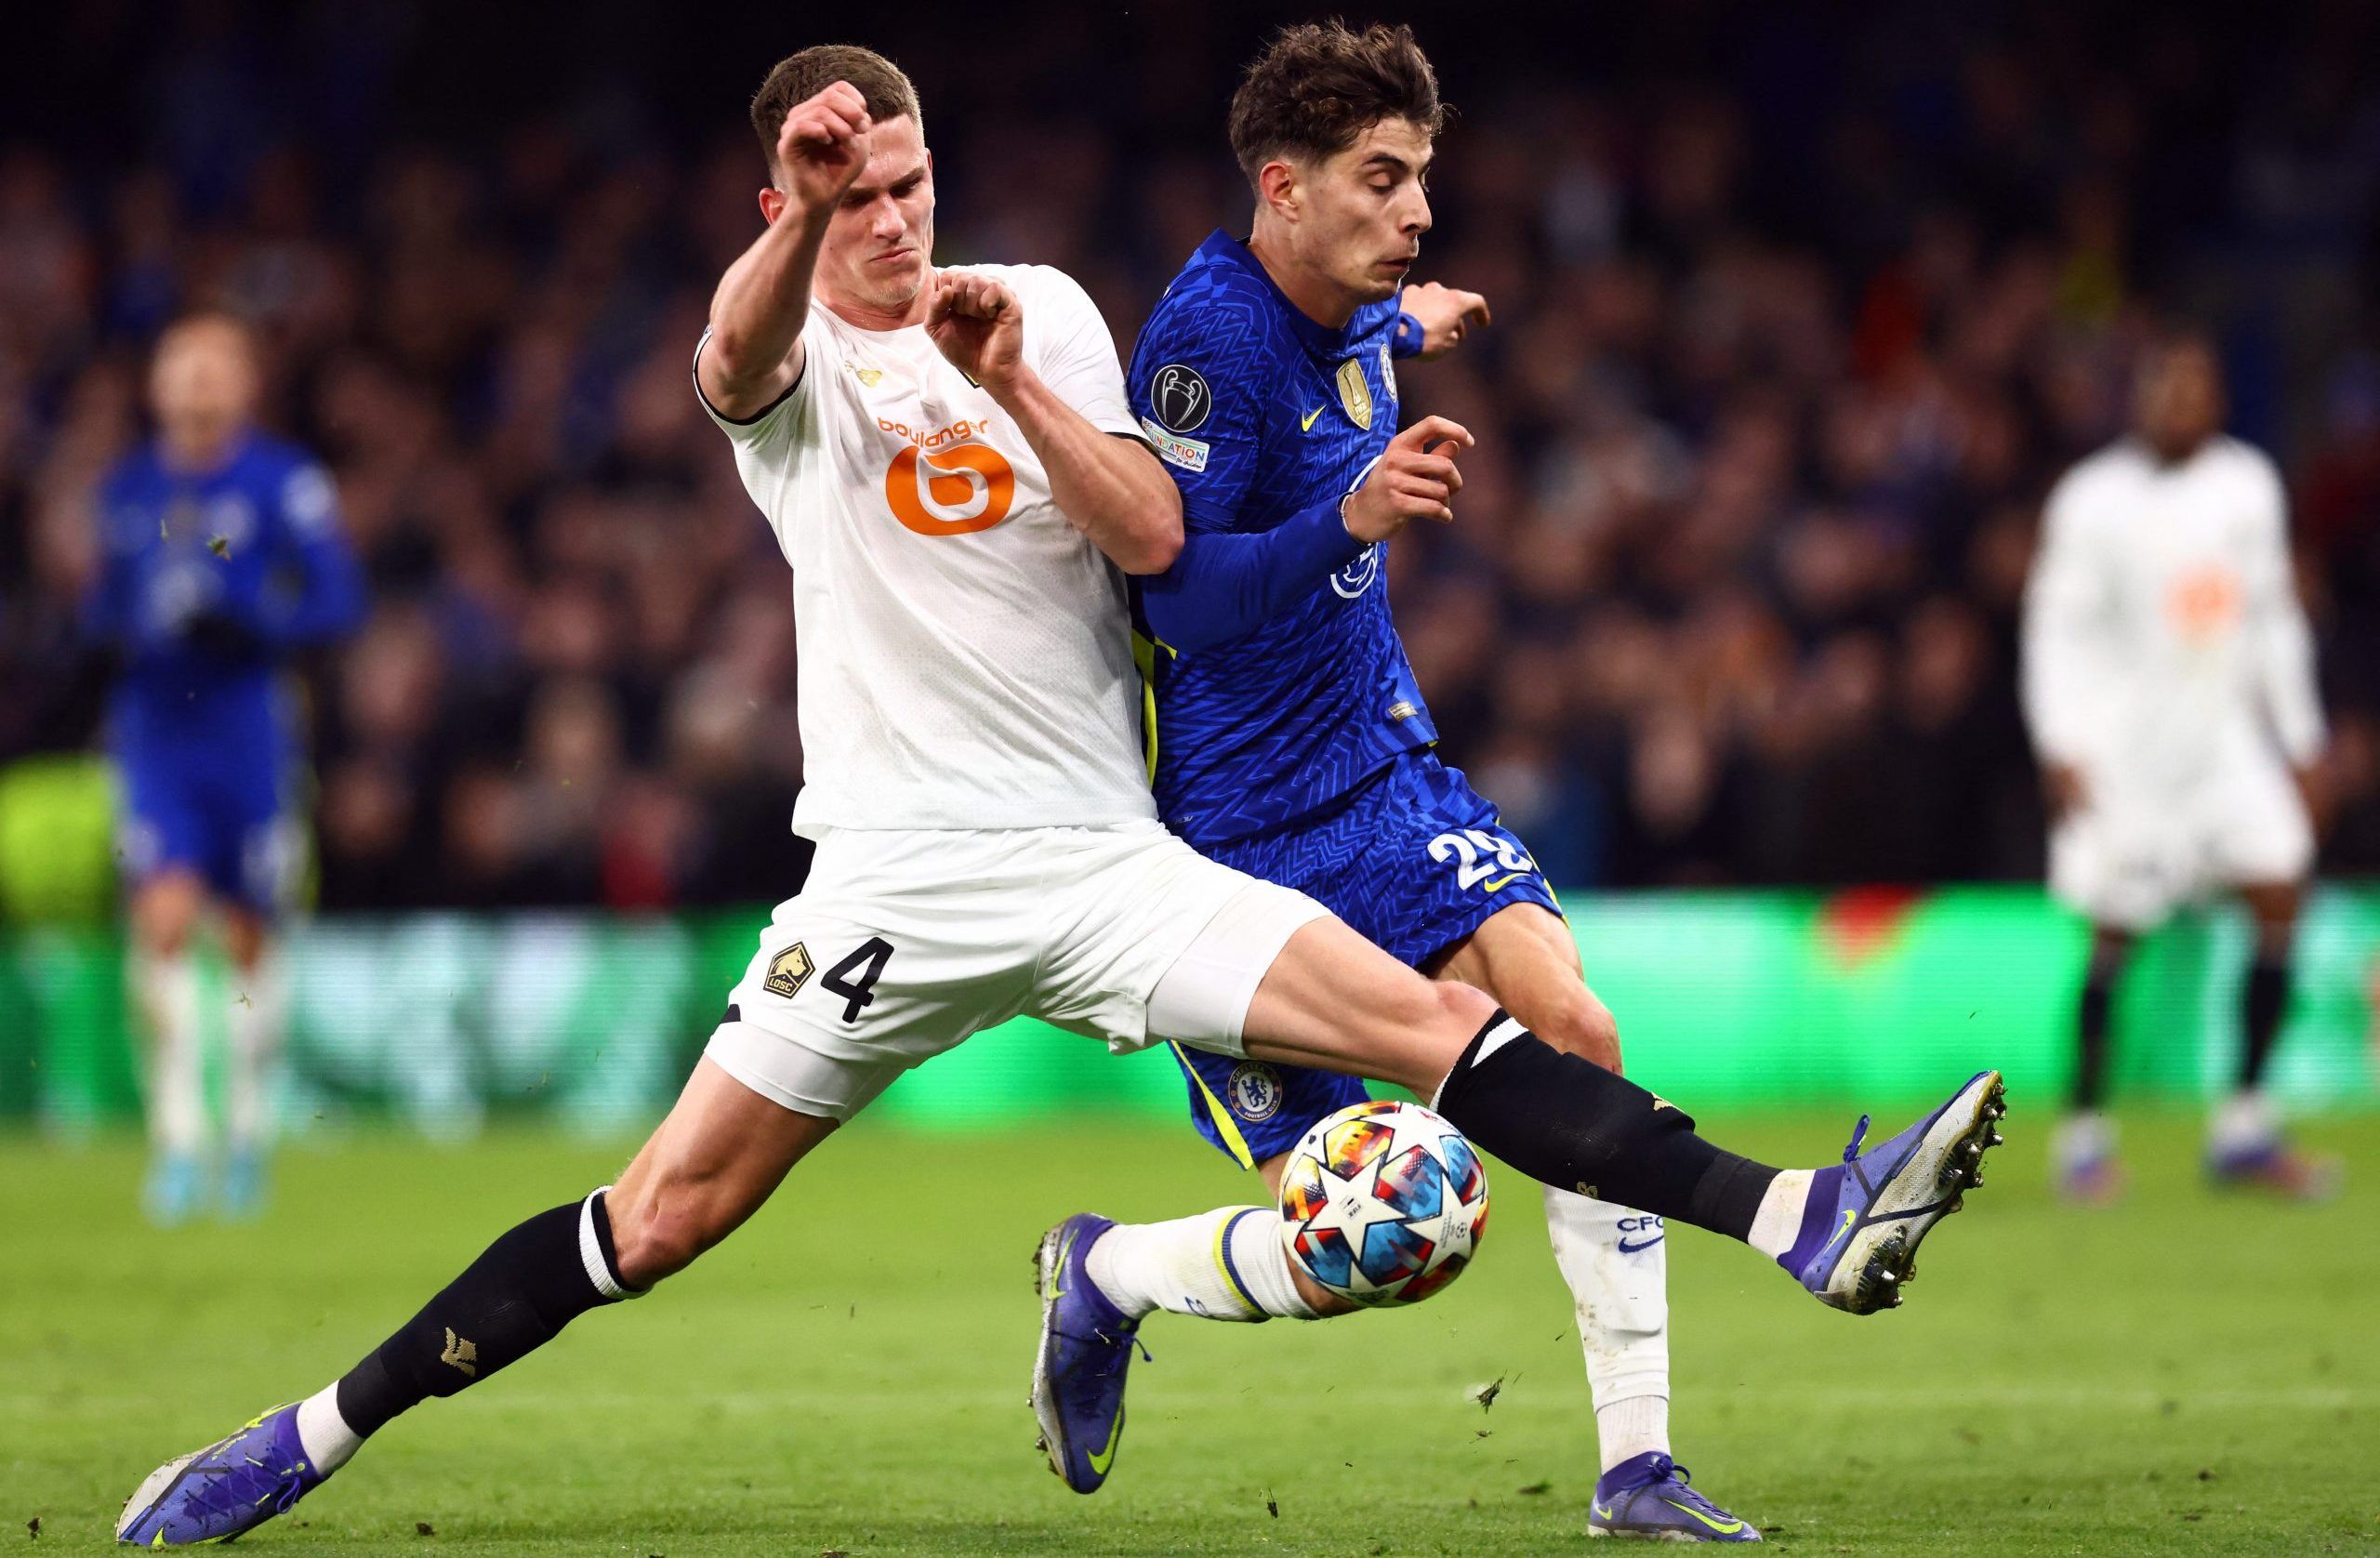 Soccer Football - Champions League - Round of 16 First Leg - Chelsea v Lille - Stamford Bridge, London, Britain - February 22, 2022 Lille's Sven Botman in action with Chelsea's Kai Havertz REUTERS/David Klein